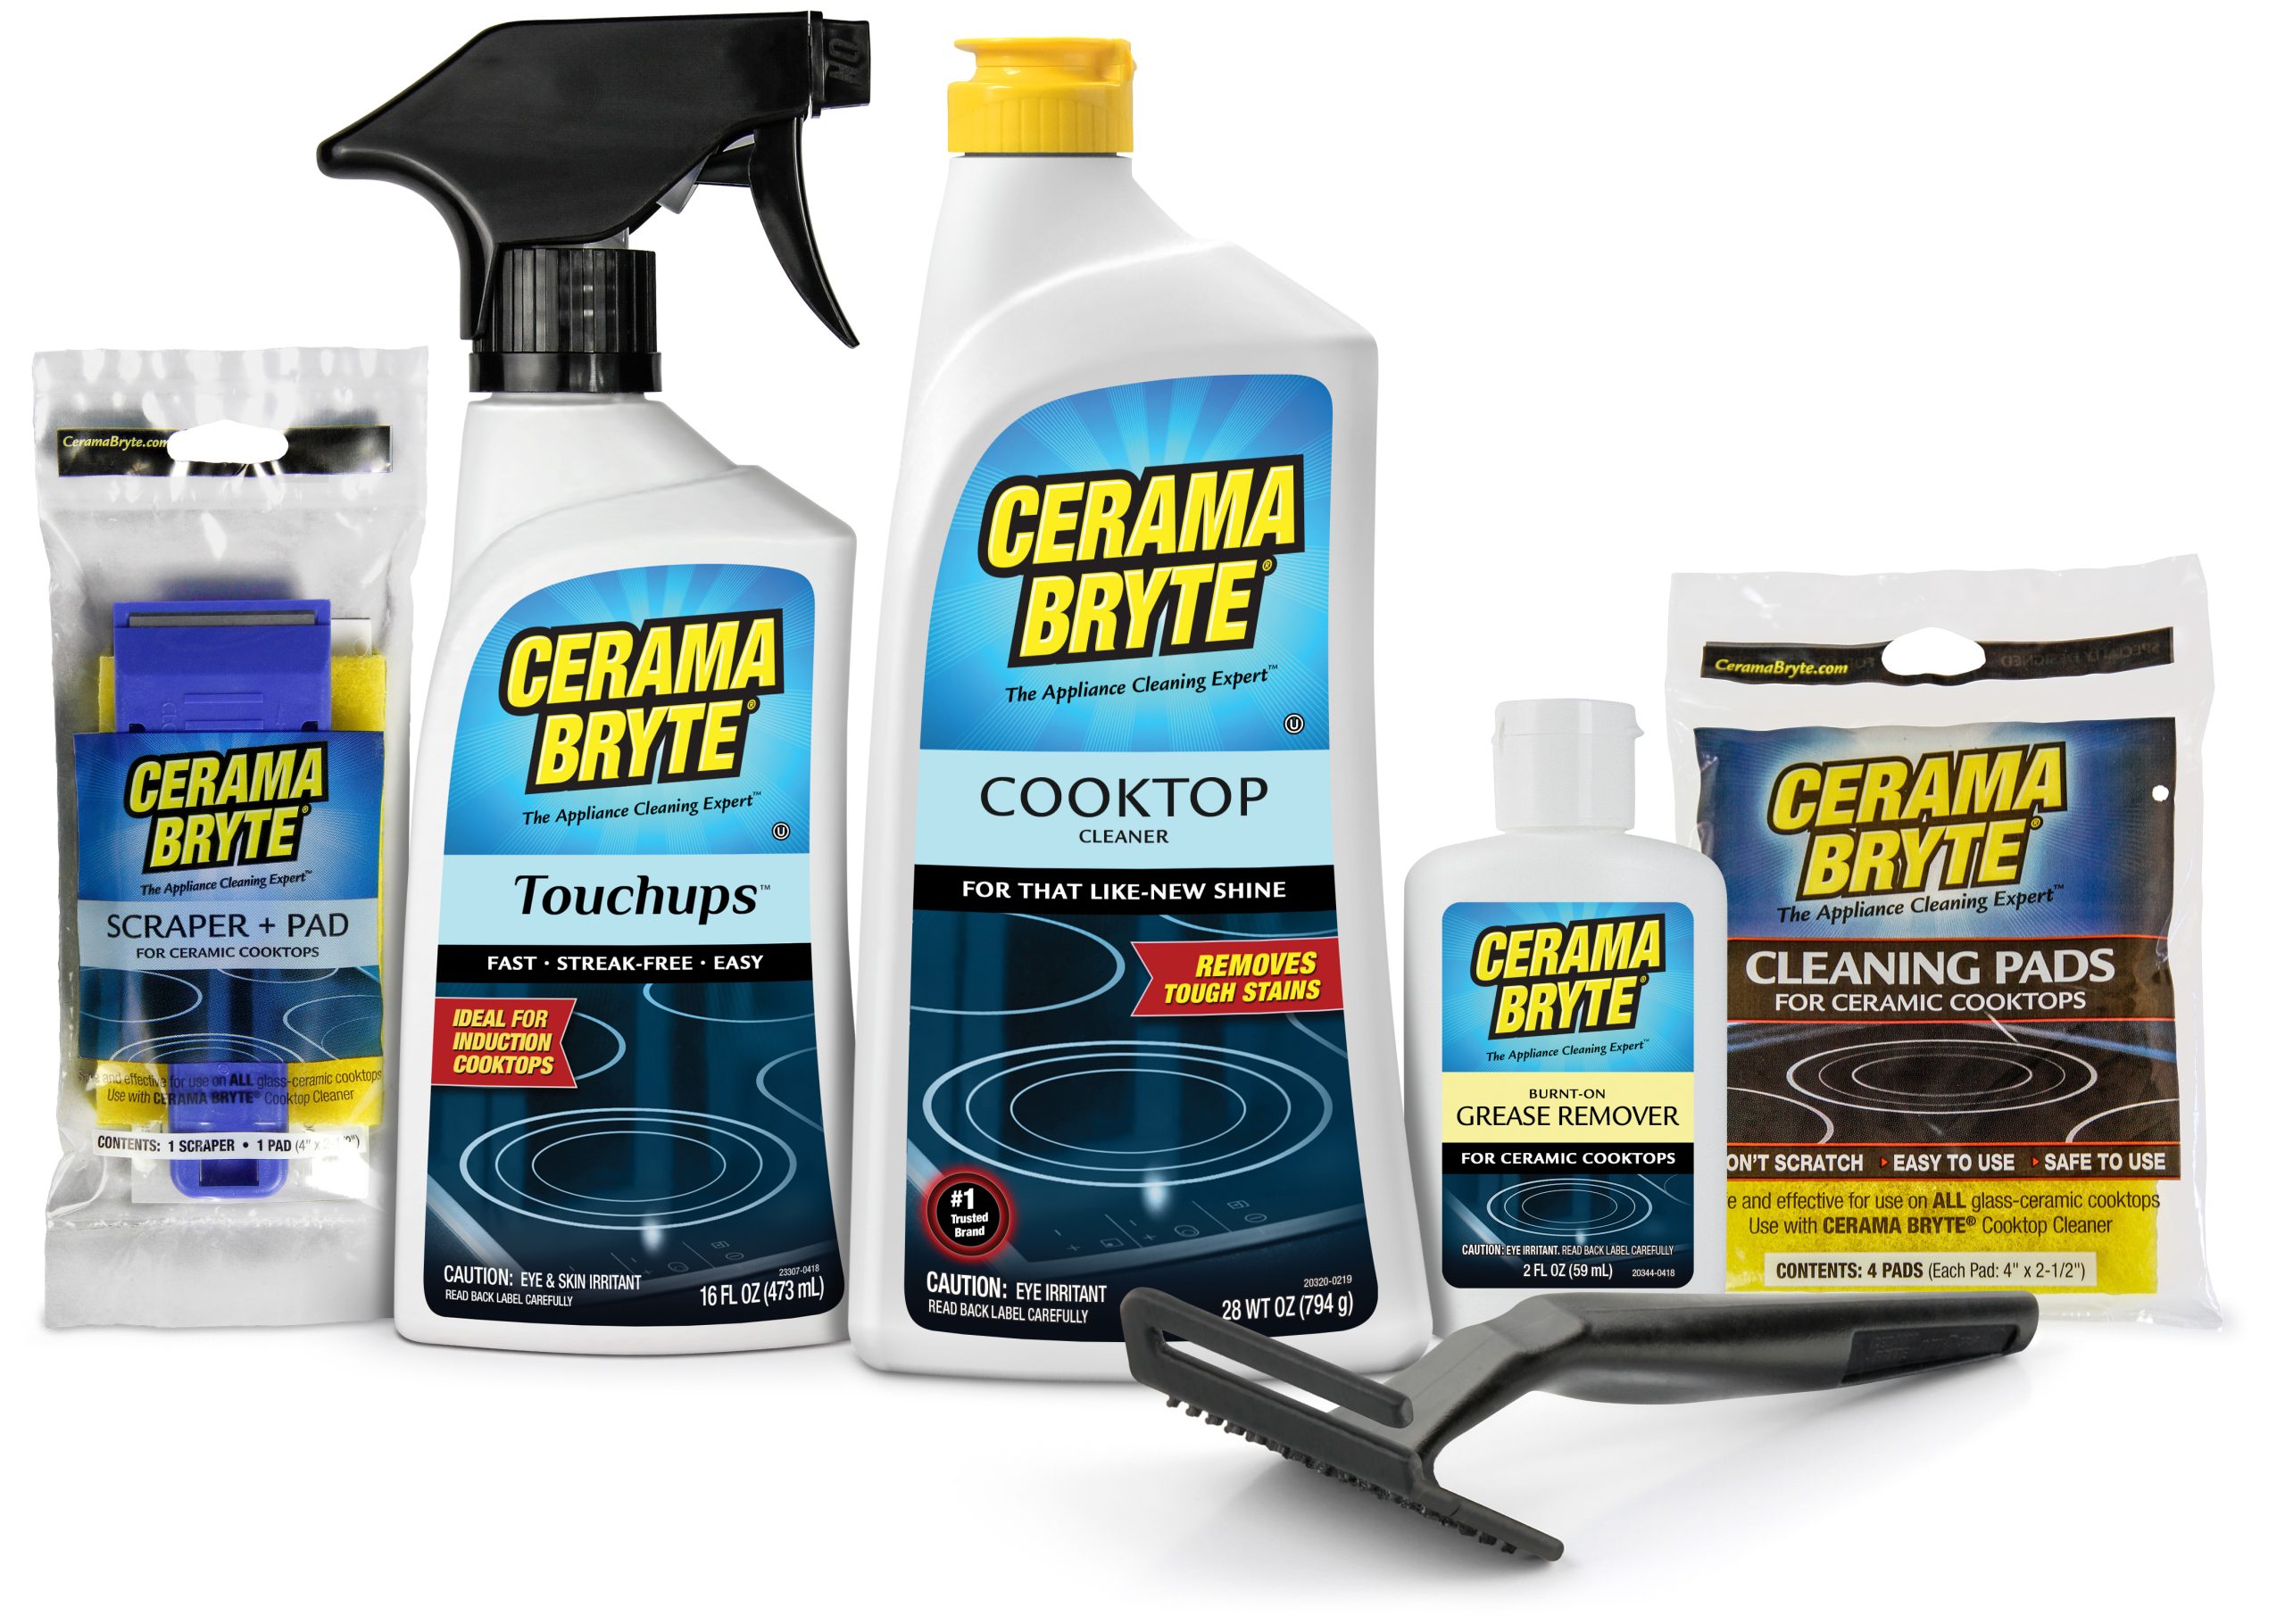 Complete Cooking Cleaning Kit - Cerama Bryte